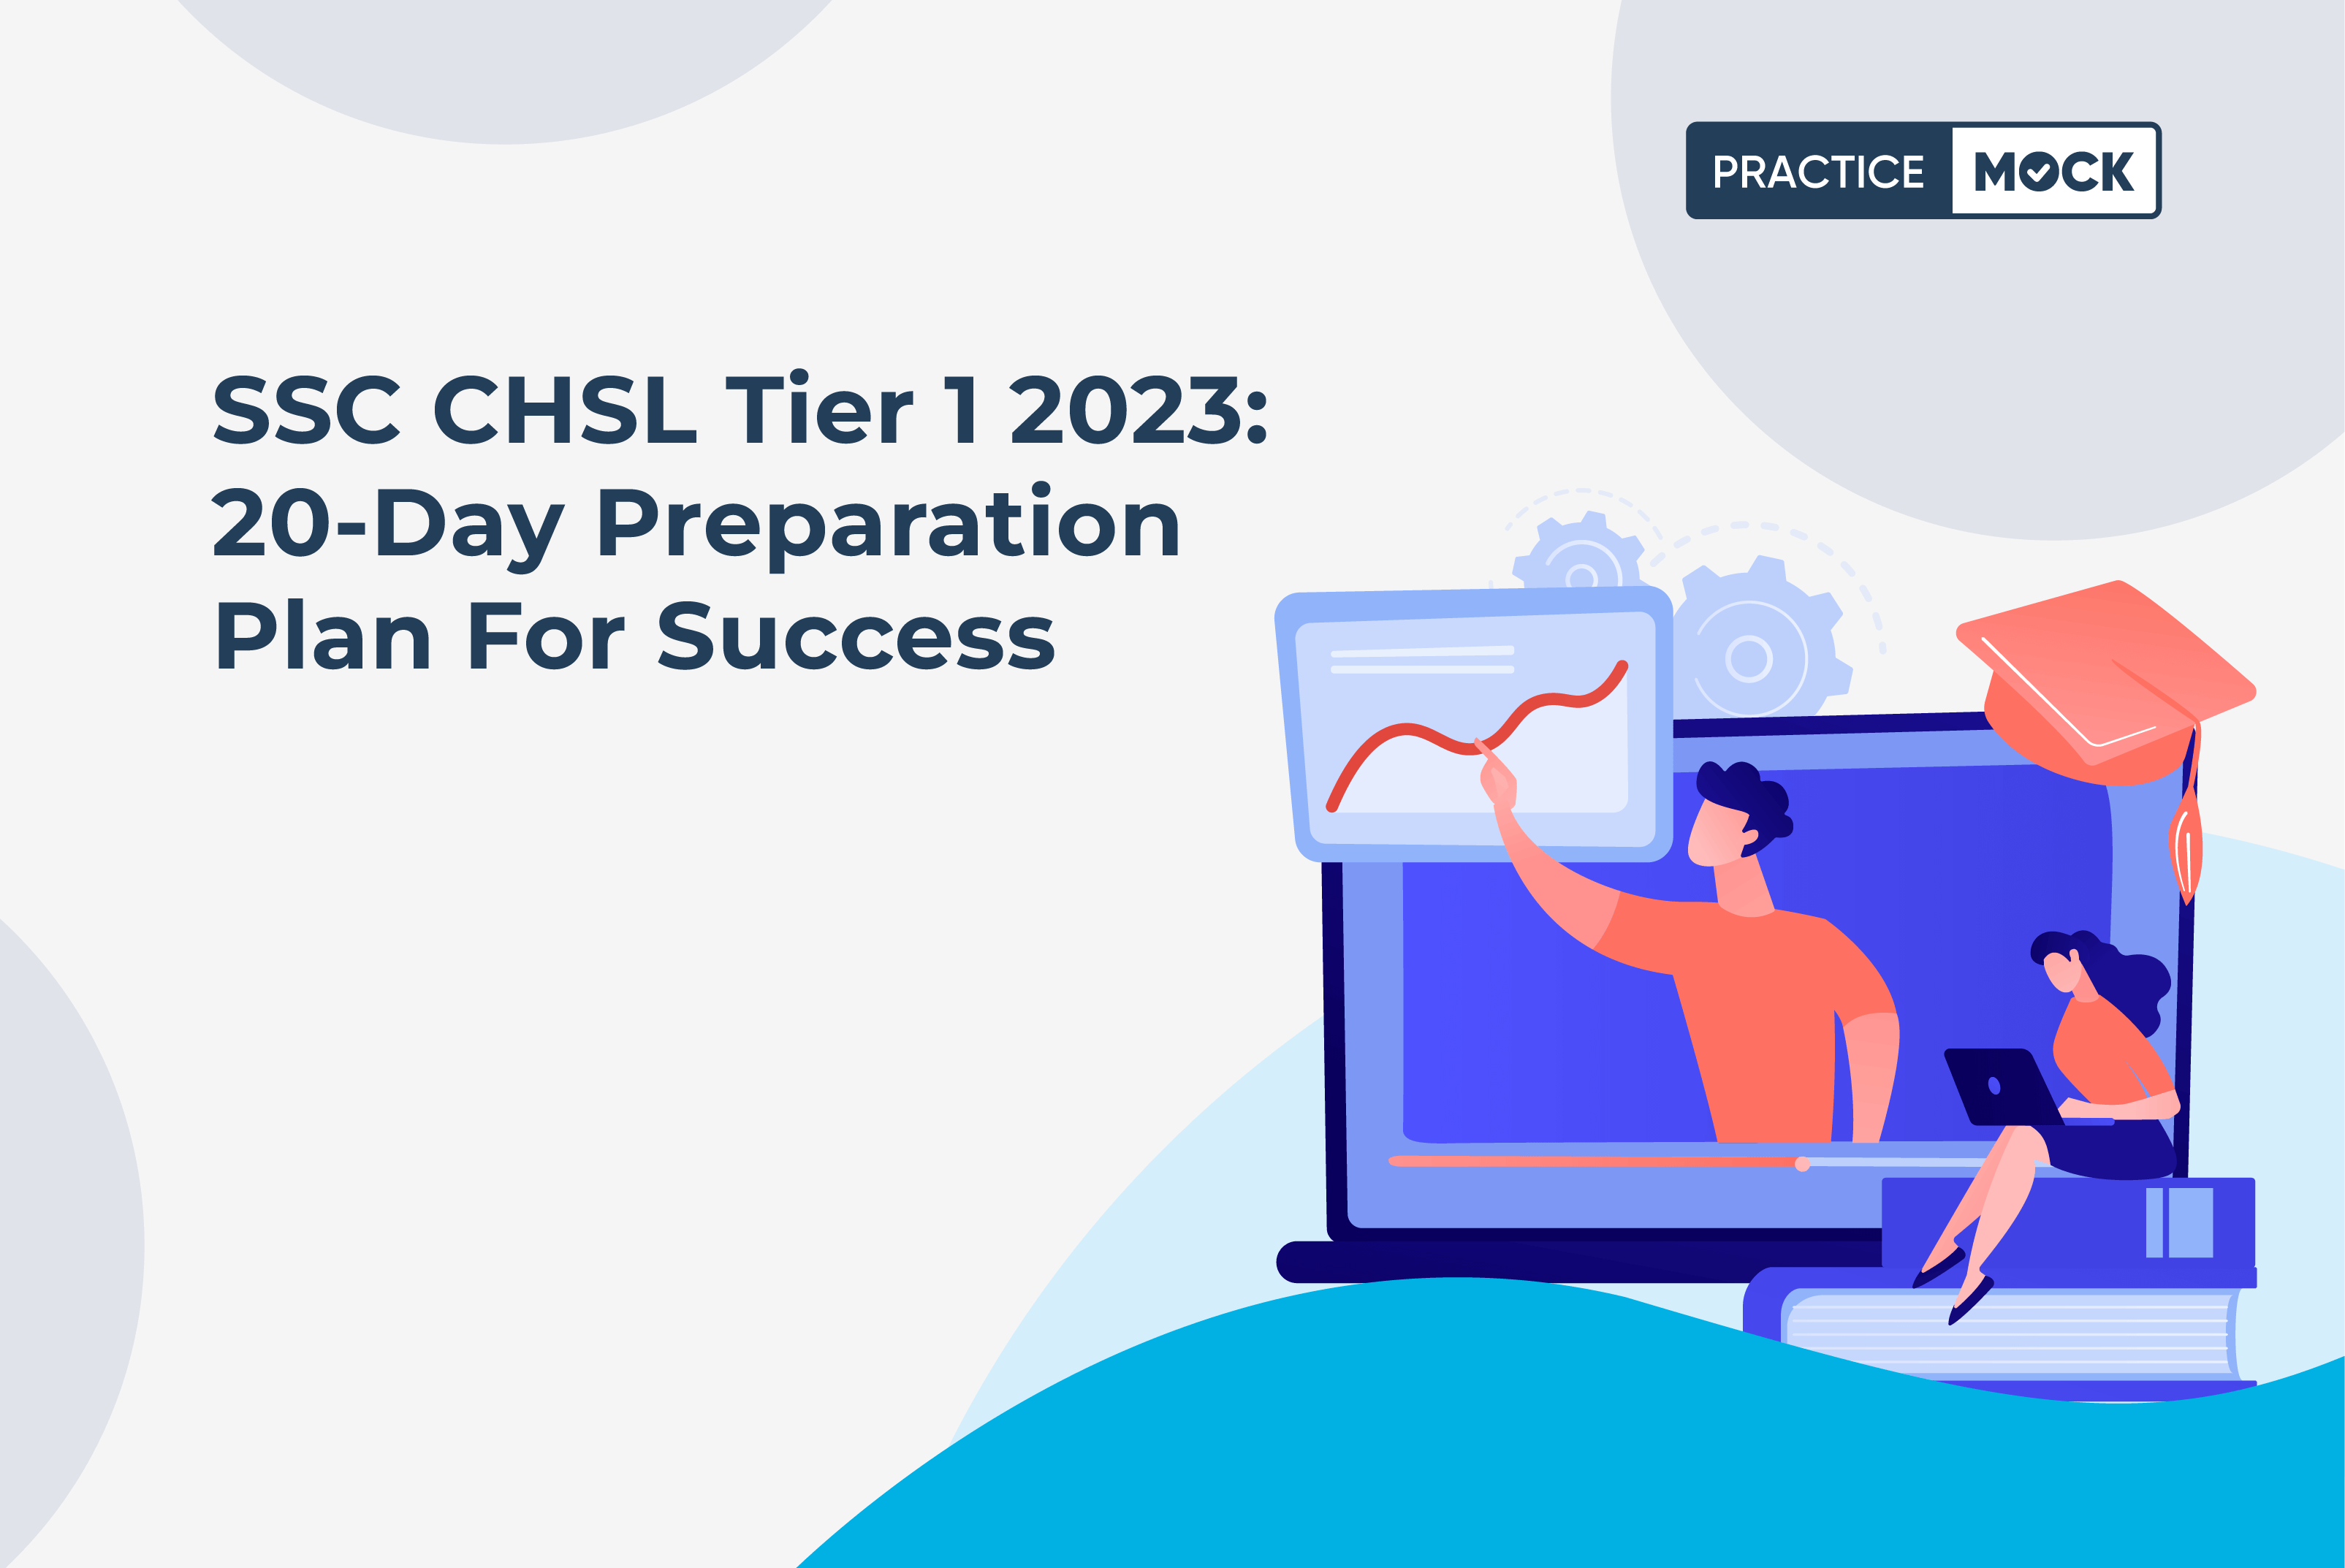 20-Day SSC CHSL Tier 1 2023 Preparation Plan for March 9 to 21, 2023